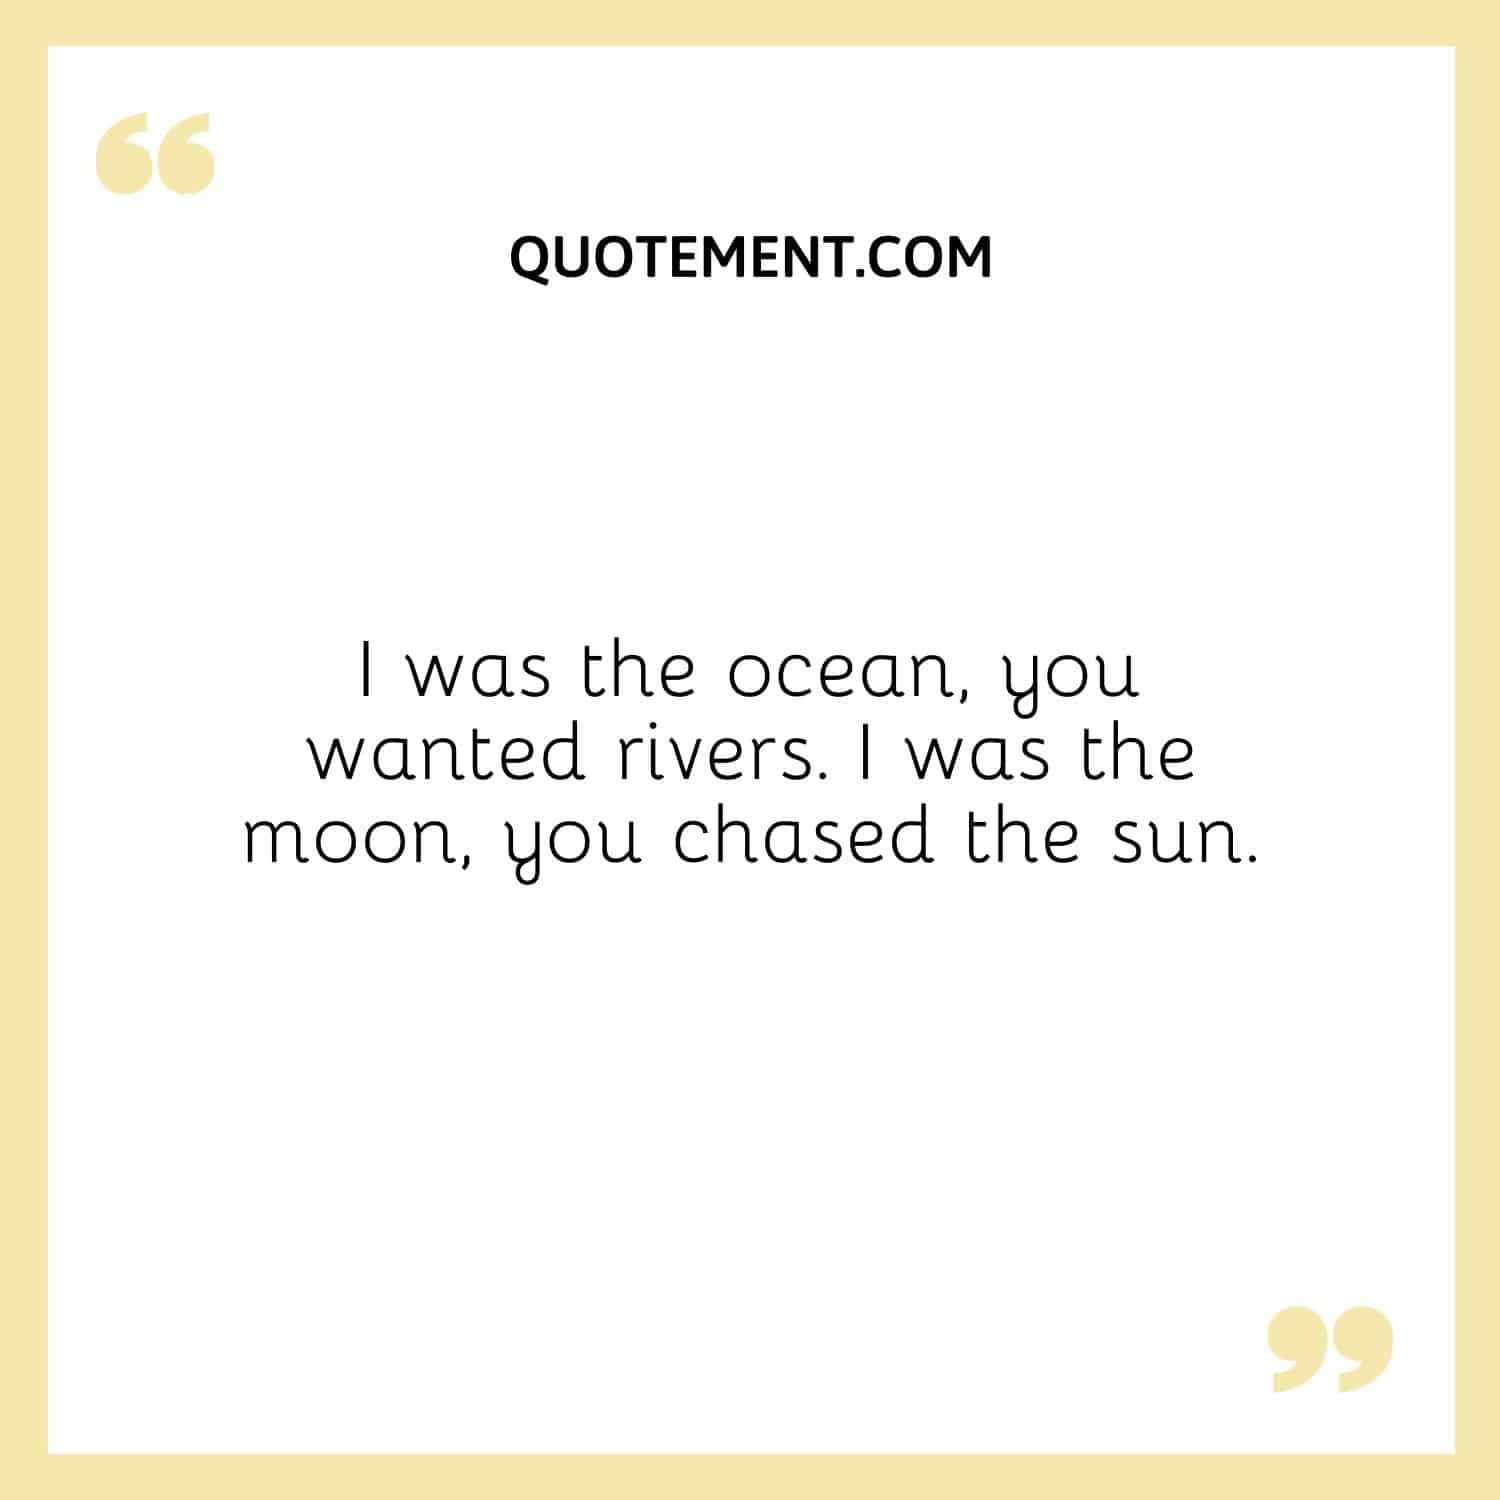 I was the ocean, you wanted rivers. I was the moon, you chased the sun.